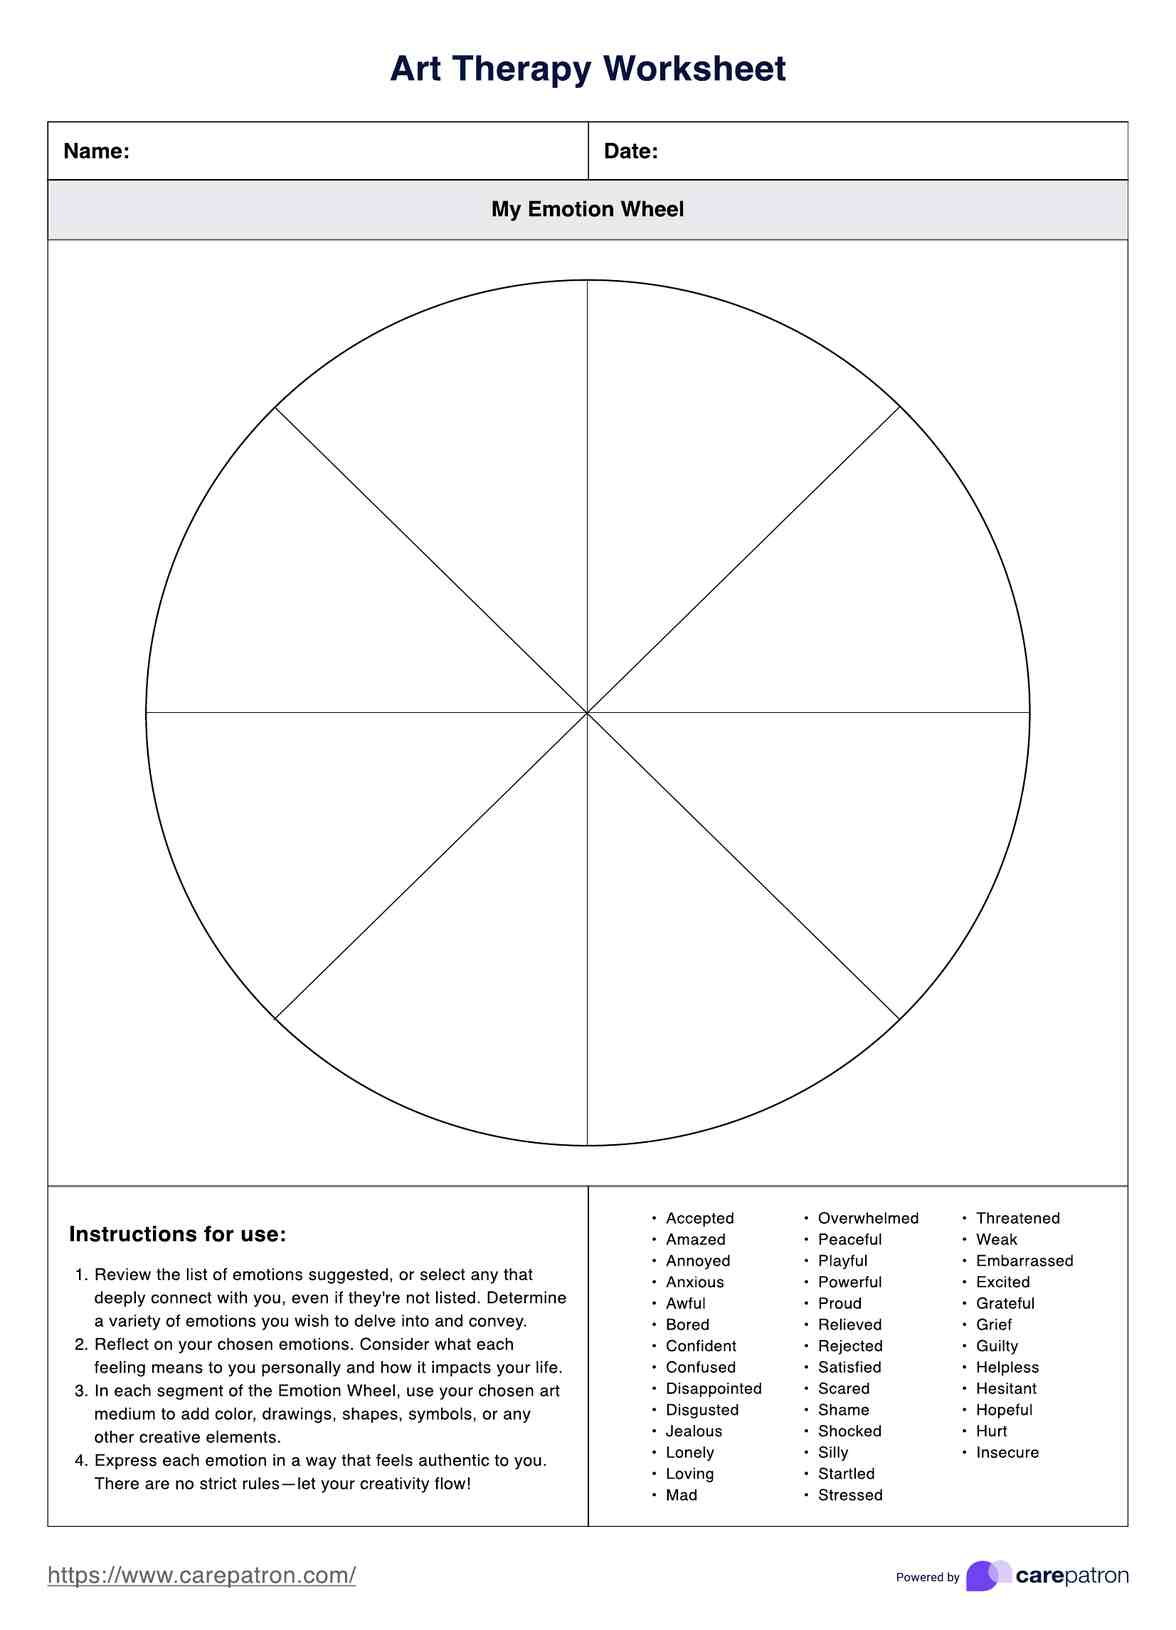 Art Therapy Worksheets PDF Example